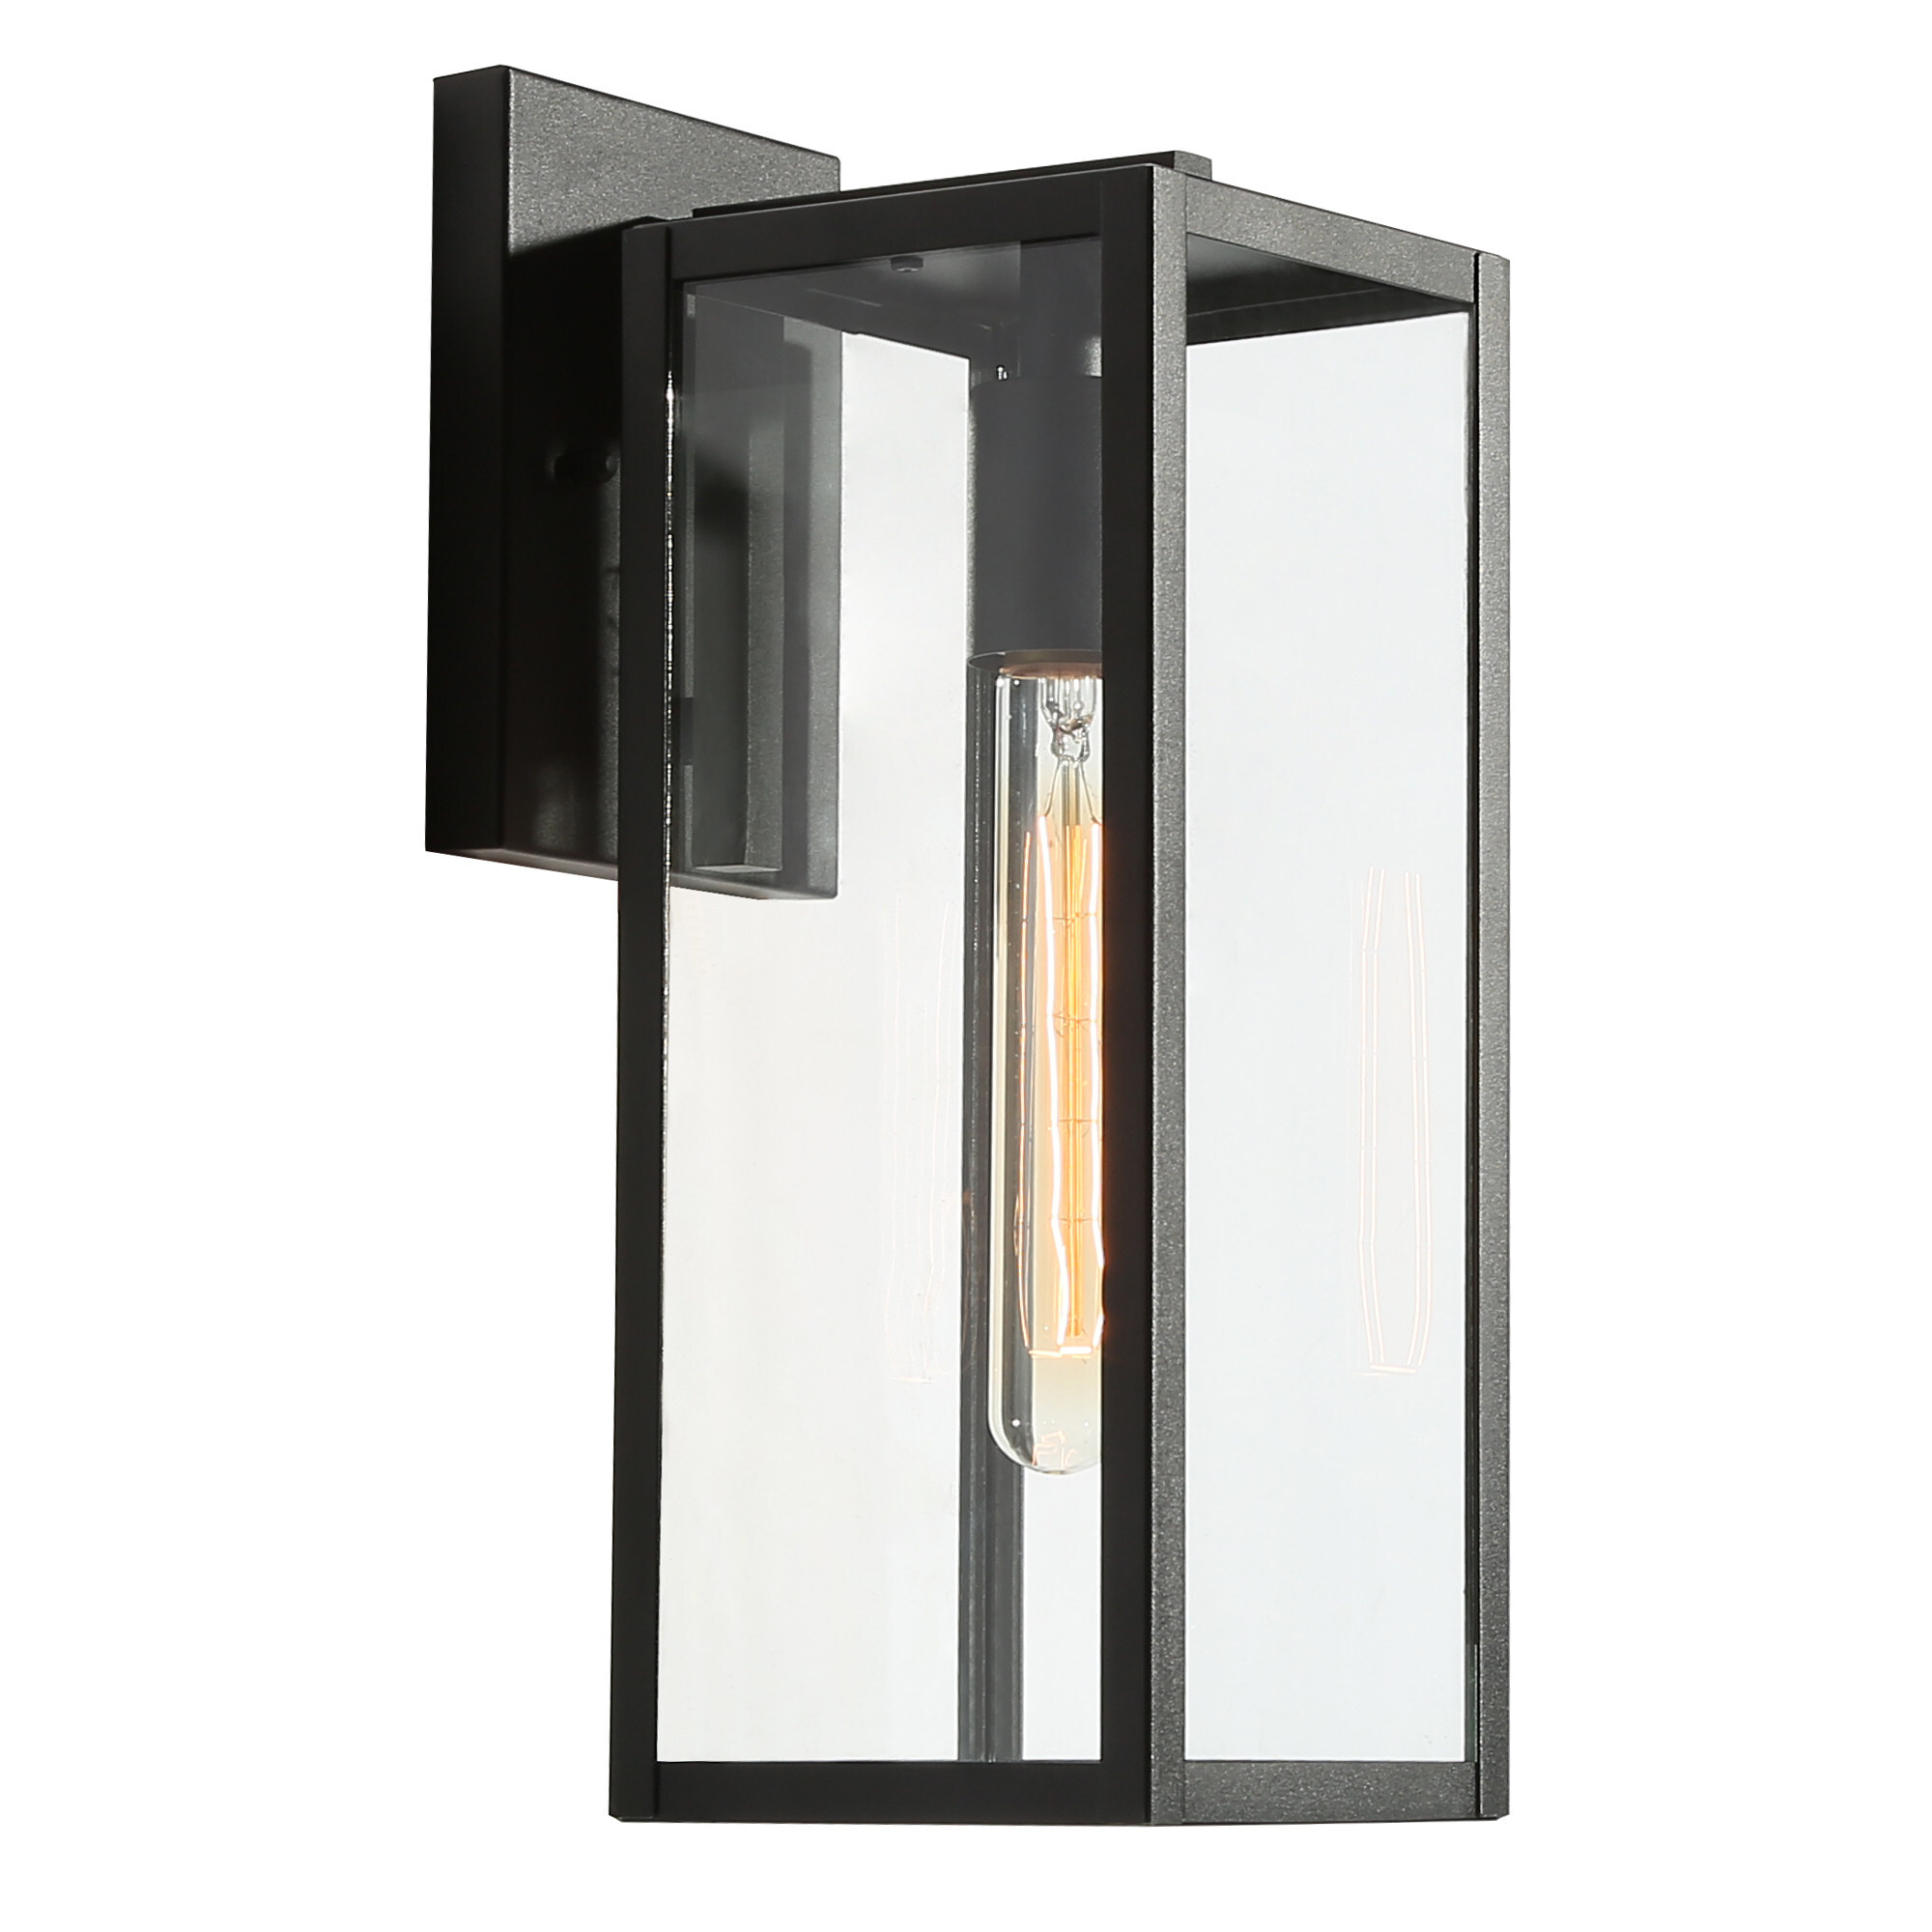 LNC 1-Light Black Modern Farmhouse Outdoor Wall Sconce/Waterproof Exterior Wall Sconce/Vintage Outdoor Lighting Fixture,4.5" L x 14" H x 5" W - image 2 of 13